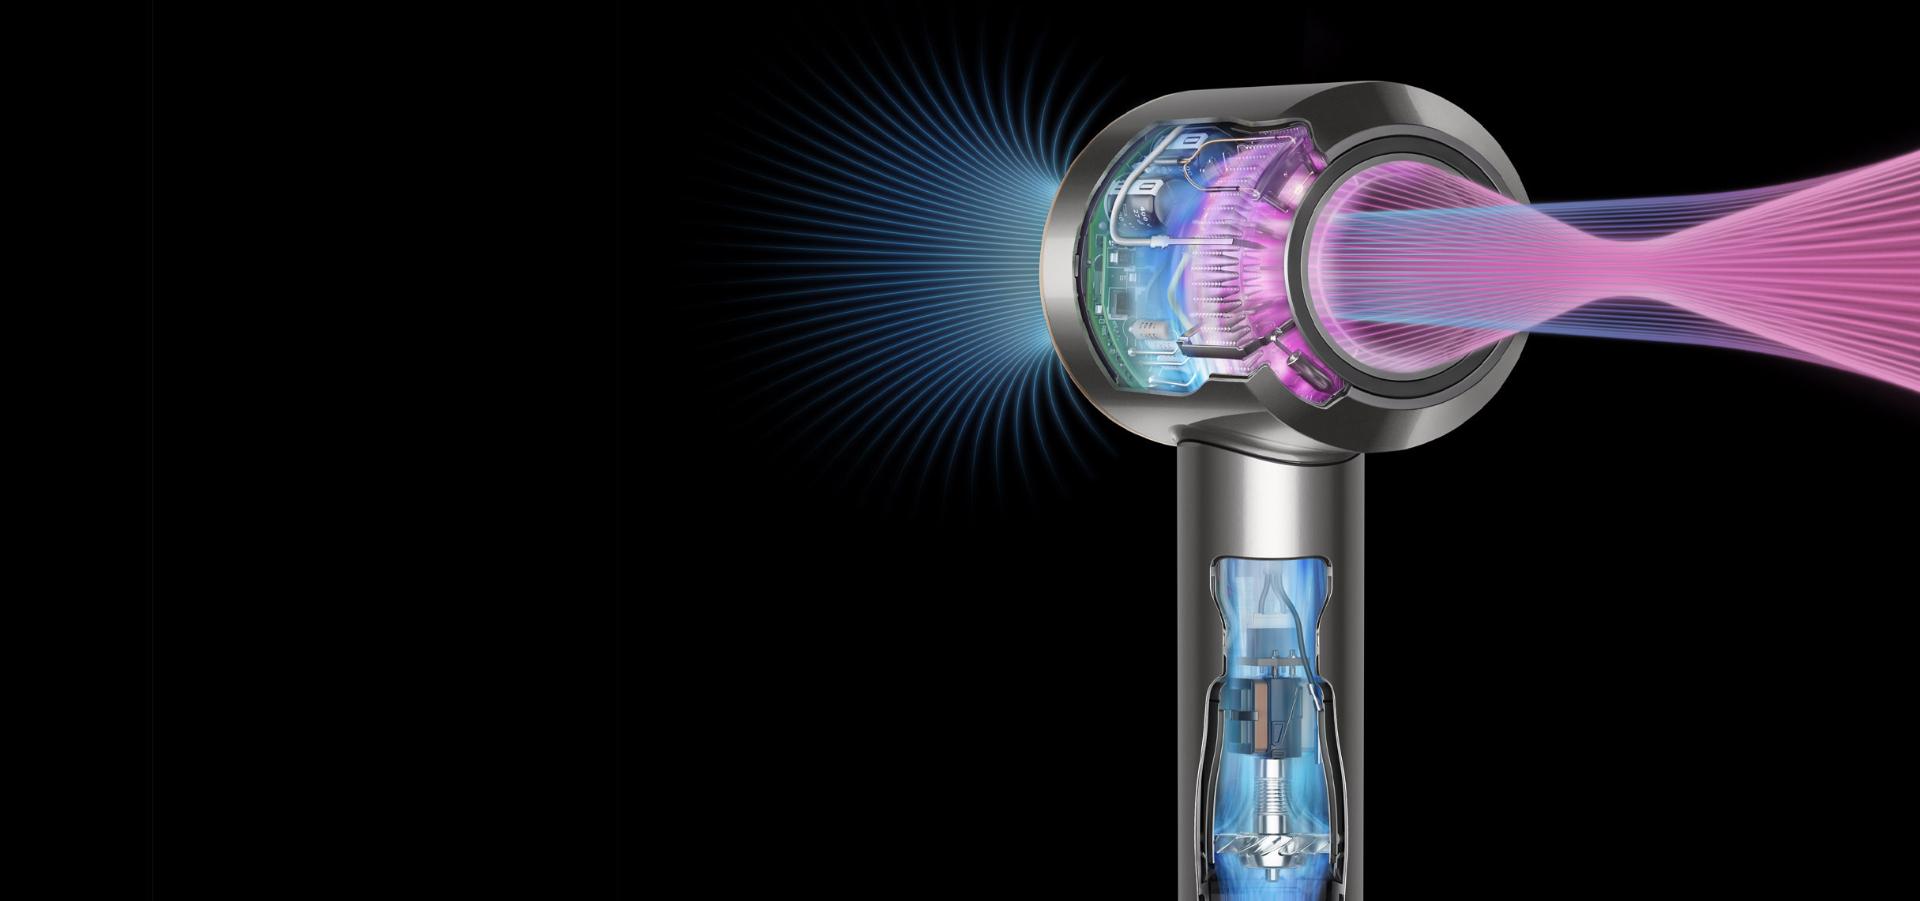 Cutaway image showing the technology inside the Dyson Supersonic hair dryer.